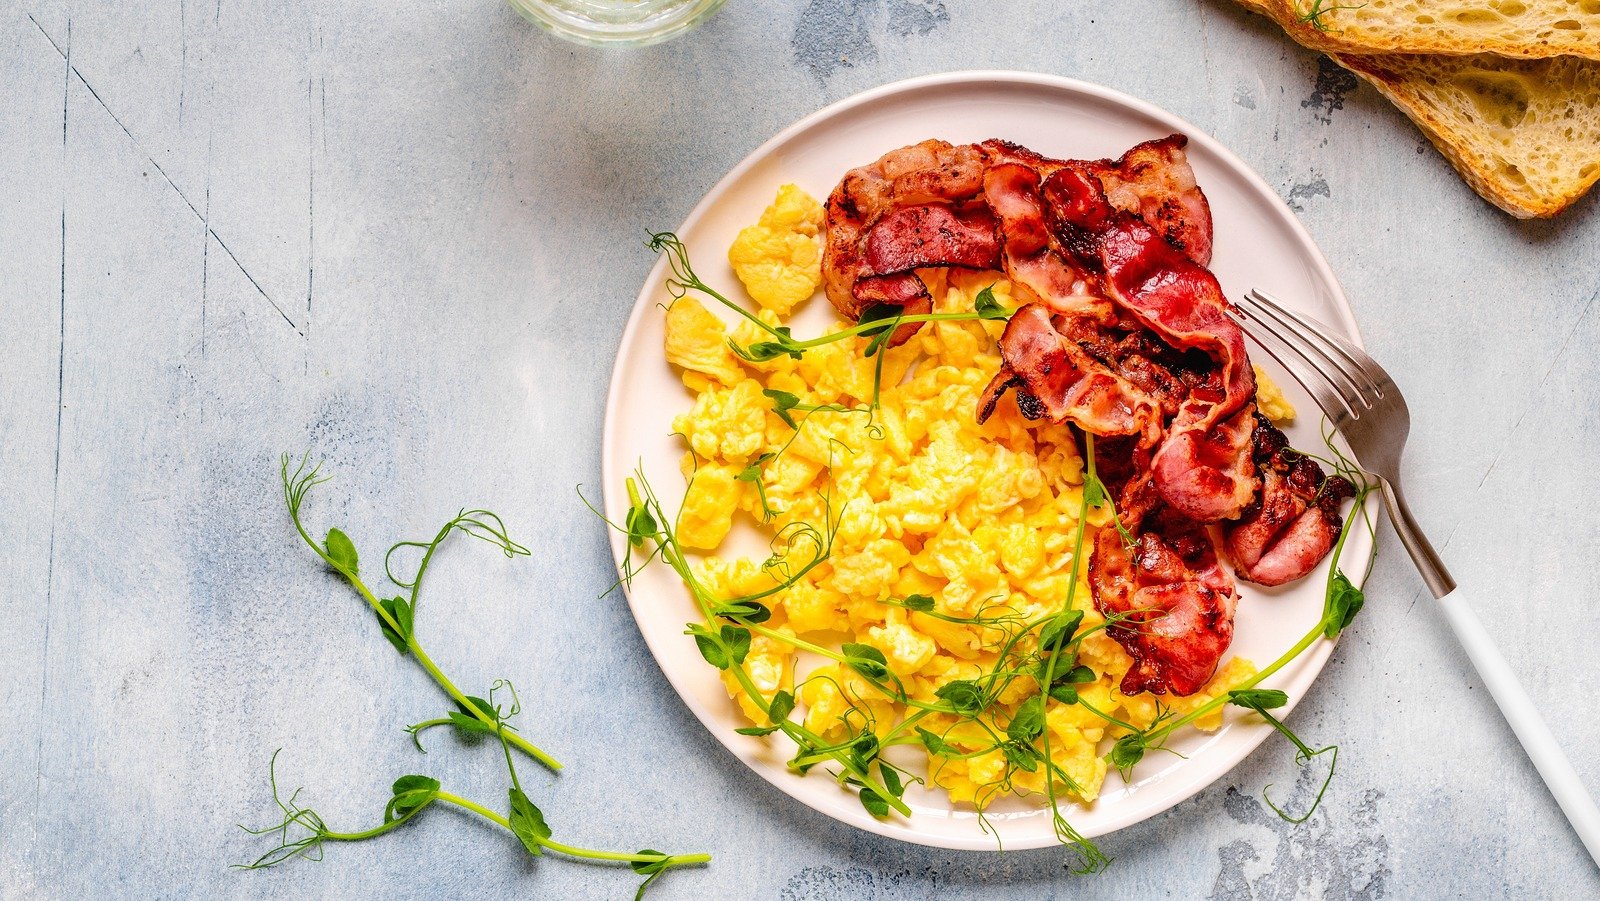 How Bacon And Eggs Became An Inseparable Breakfast Duo